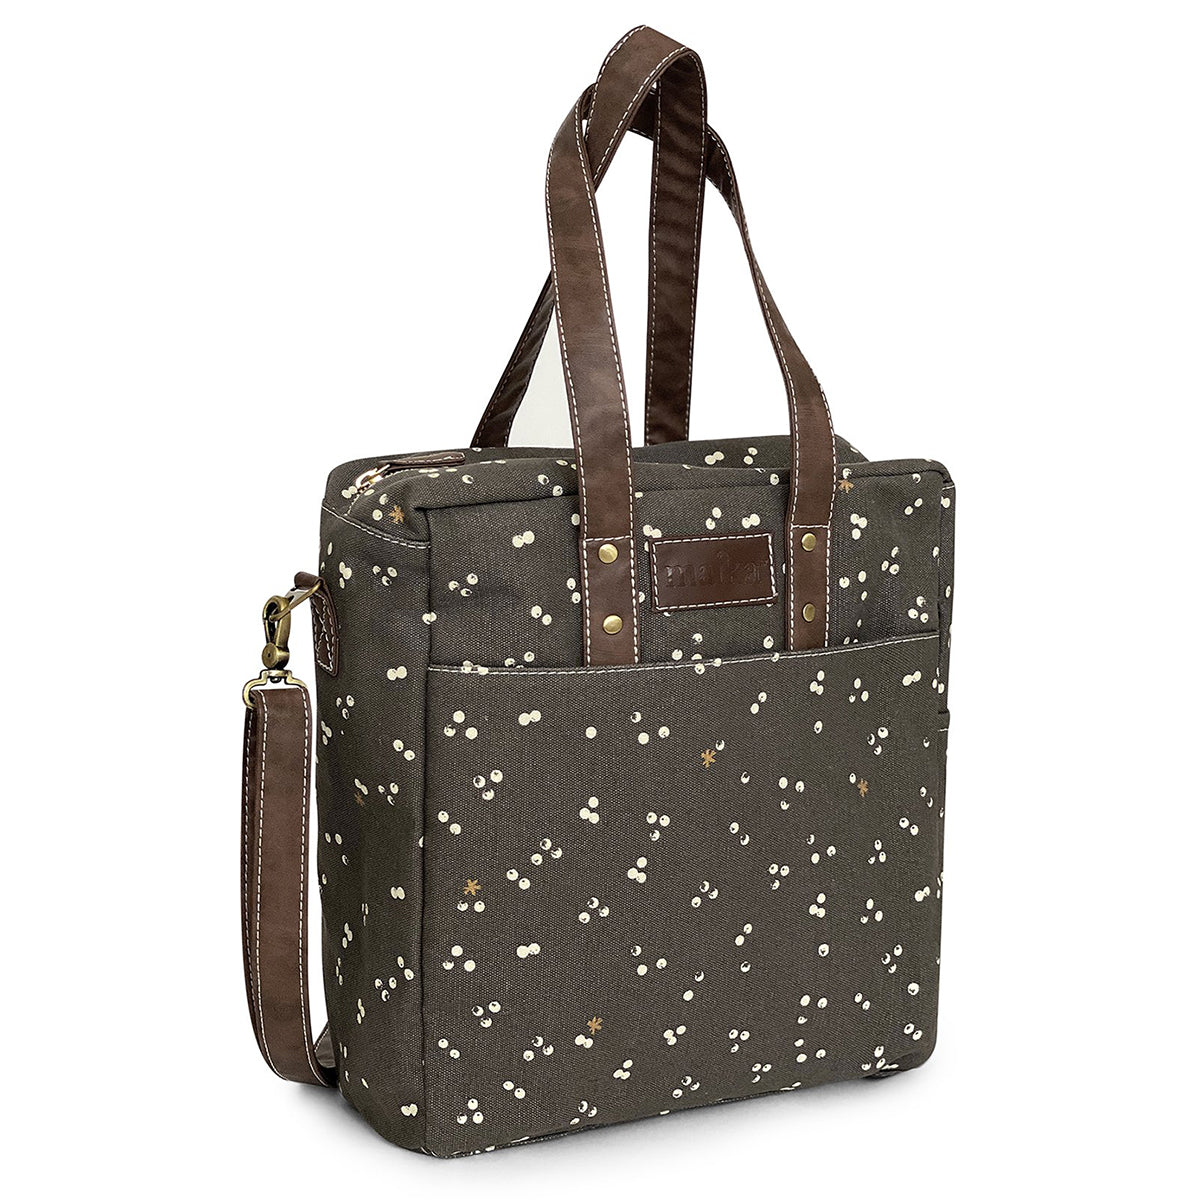 Olive green floral-patterned Maika Commuter Tote Nochi with leather straps and a detachable shoulder strap.